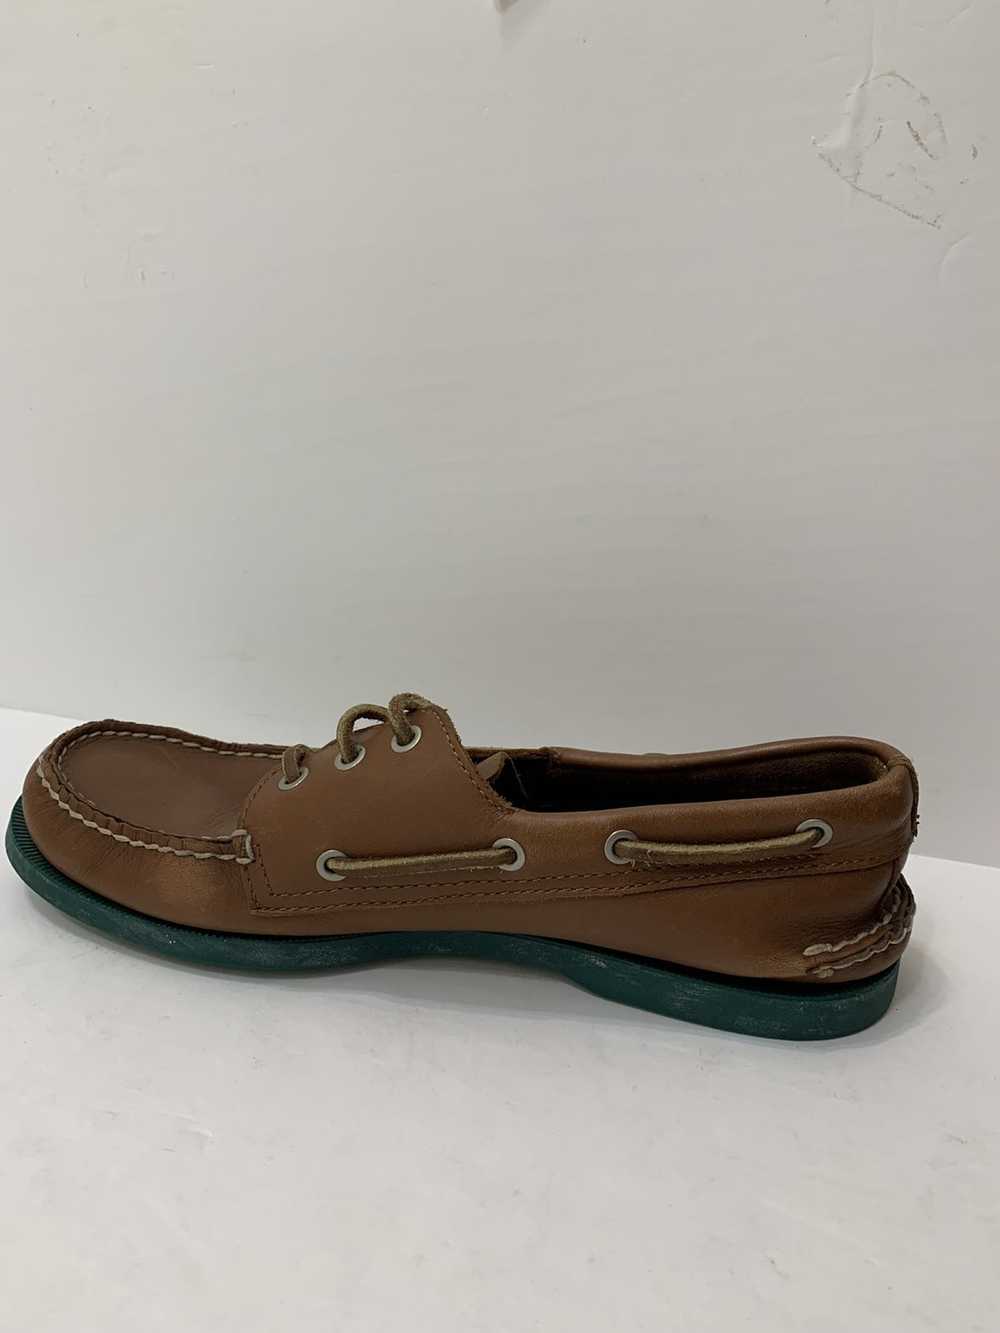 Sperry SPERRY TOP SIDER LEATHER BOAT SHOES - image 5